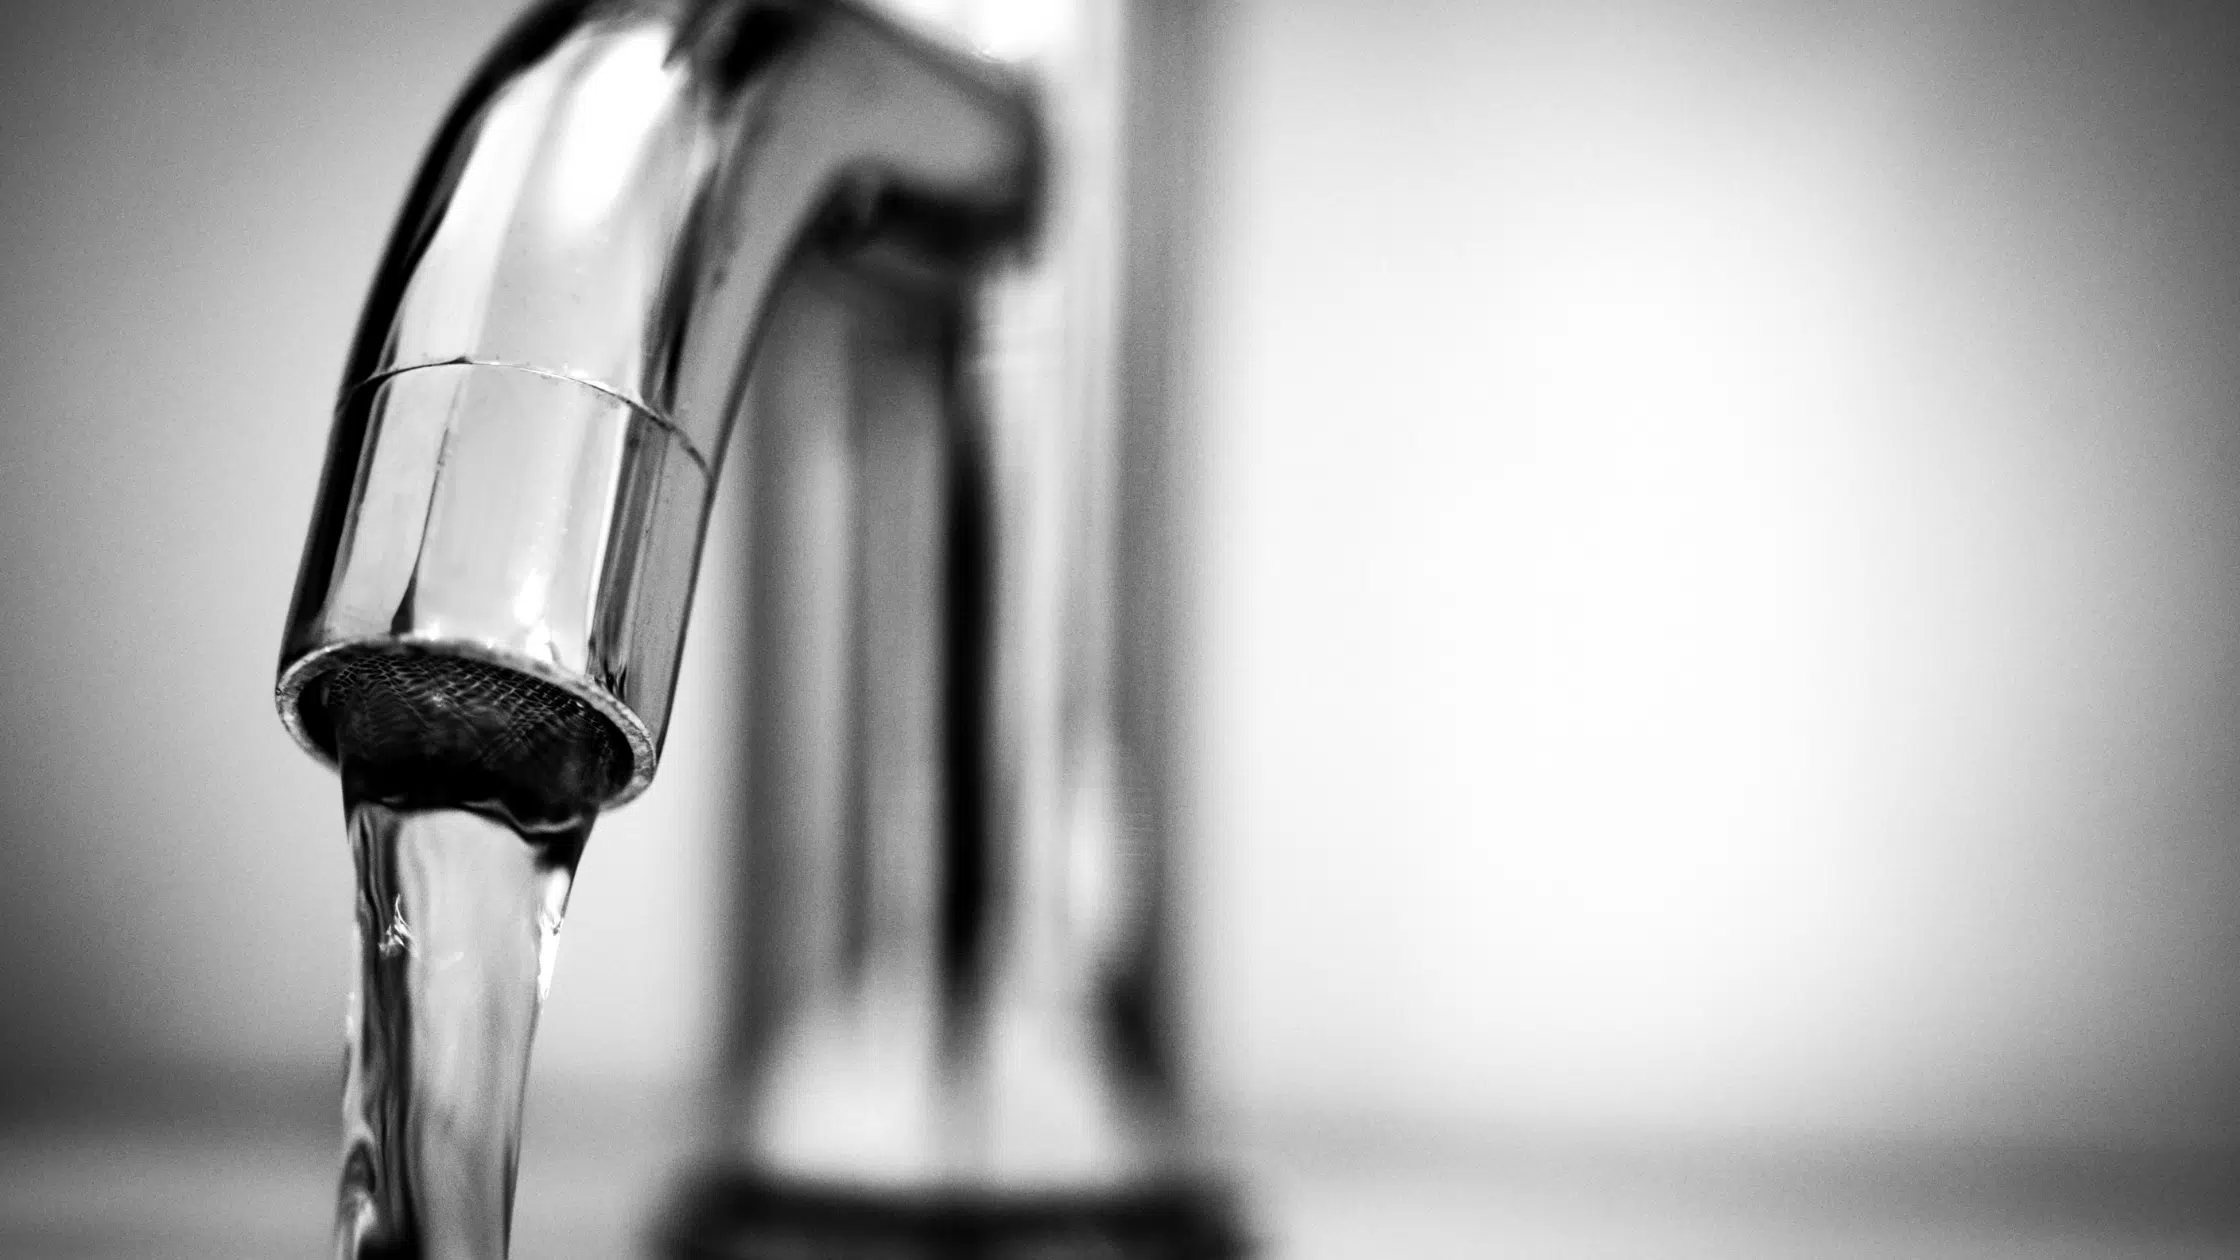 Town of Minto Precautionary Boil Water Advisory Comes into Effect Today